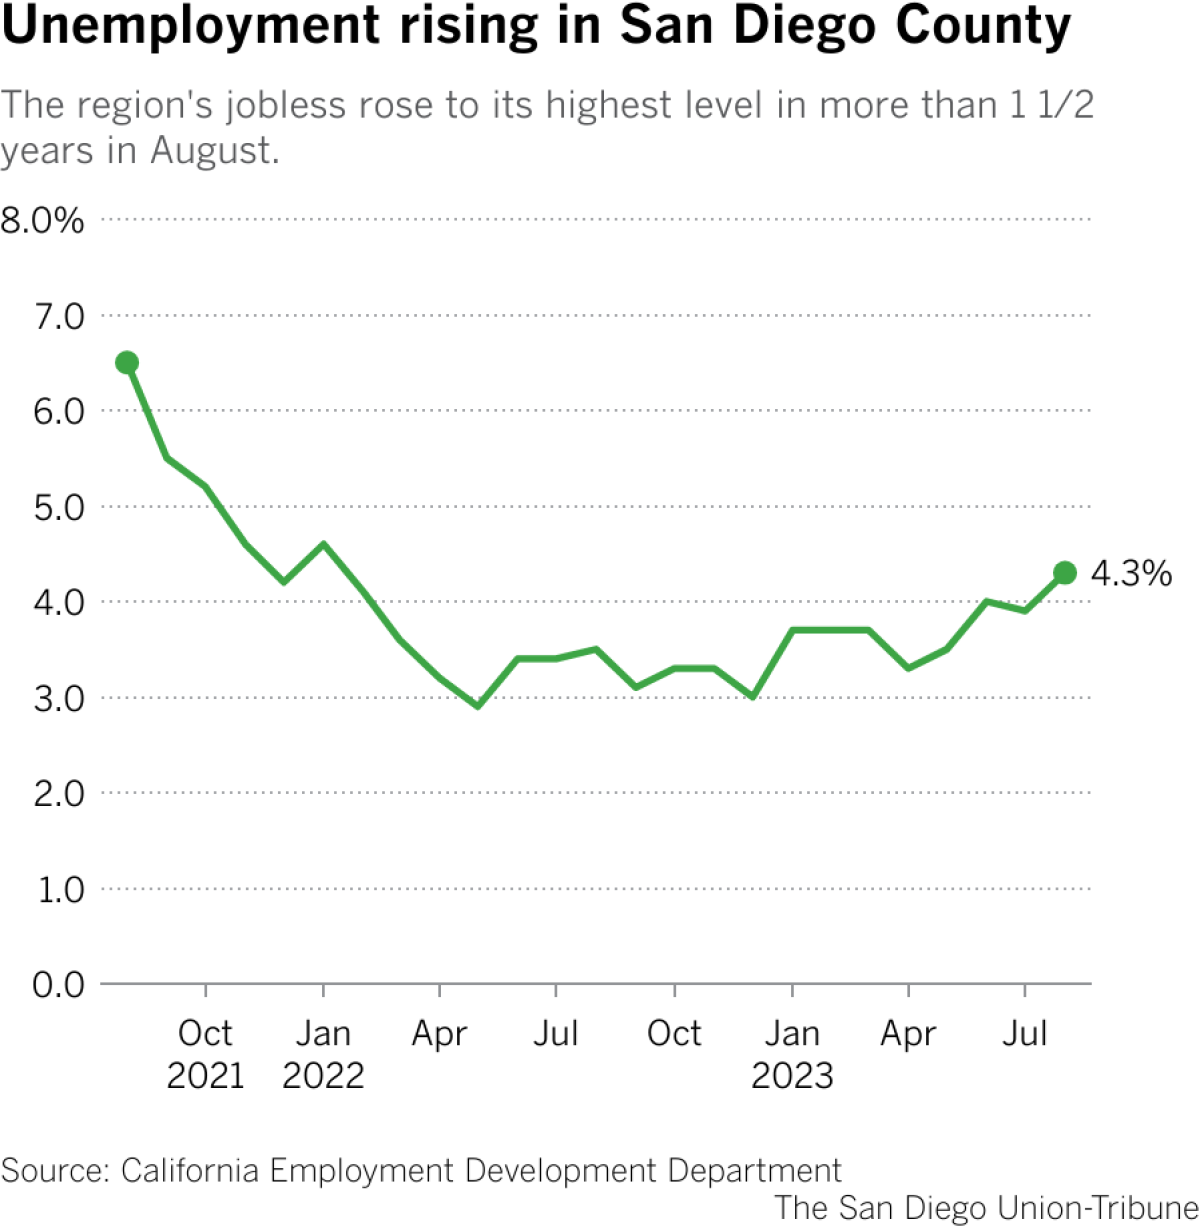 The region's jobless rose to its highest level in more than 1 1/2 years in August.